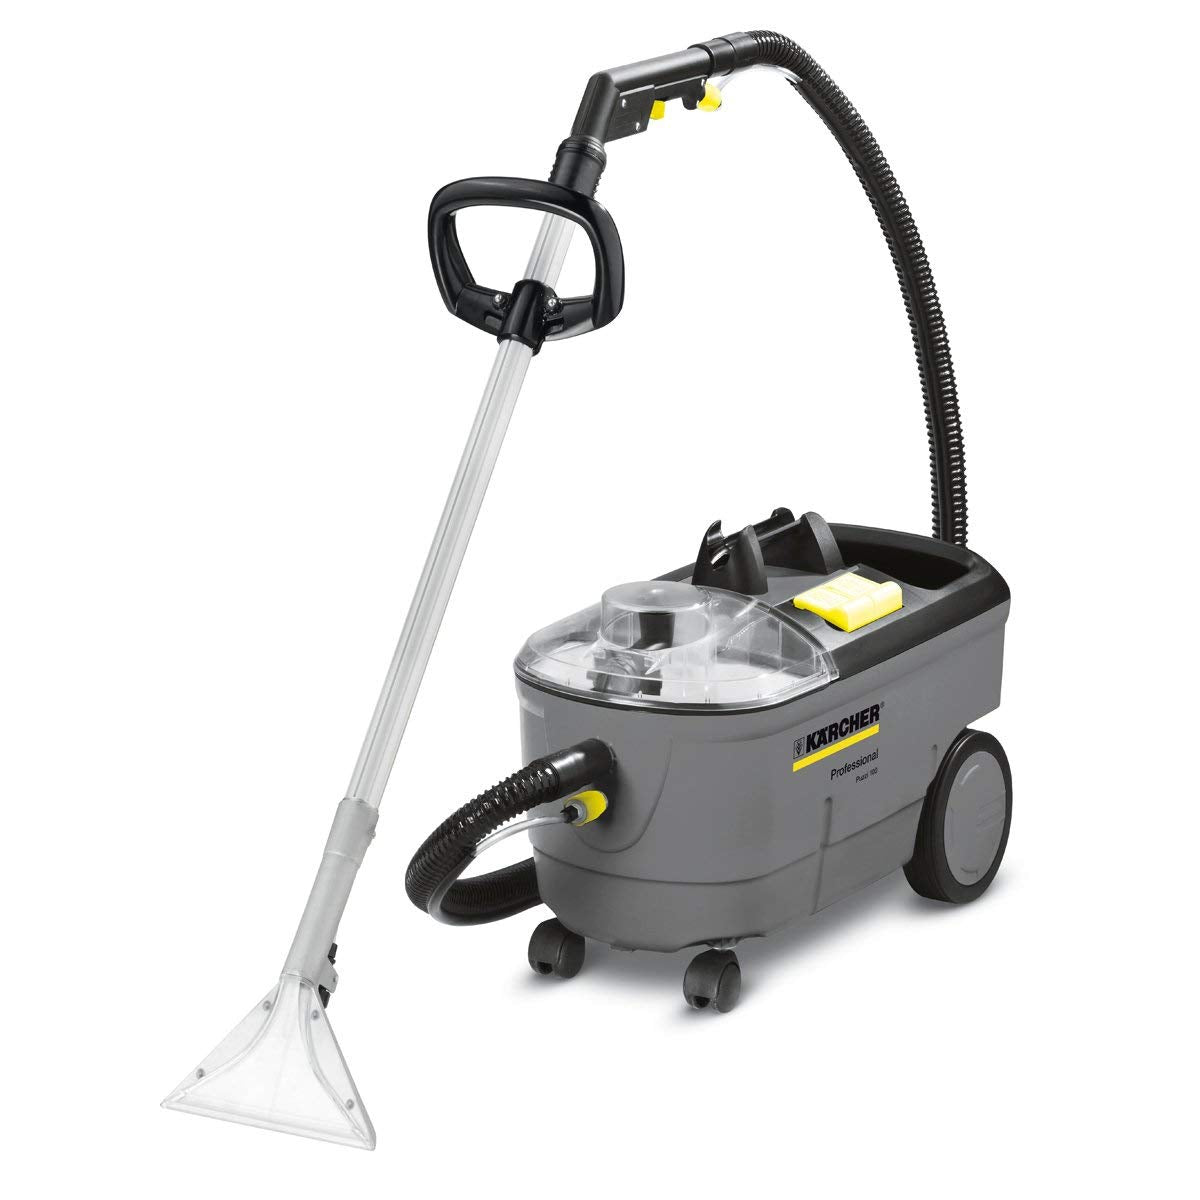 Karcher Puzzi 10-1 Carpet Cleaner with Floor and Upholstery tool - CalCleaningEquipment